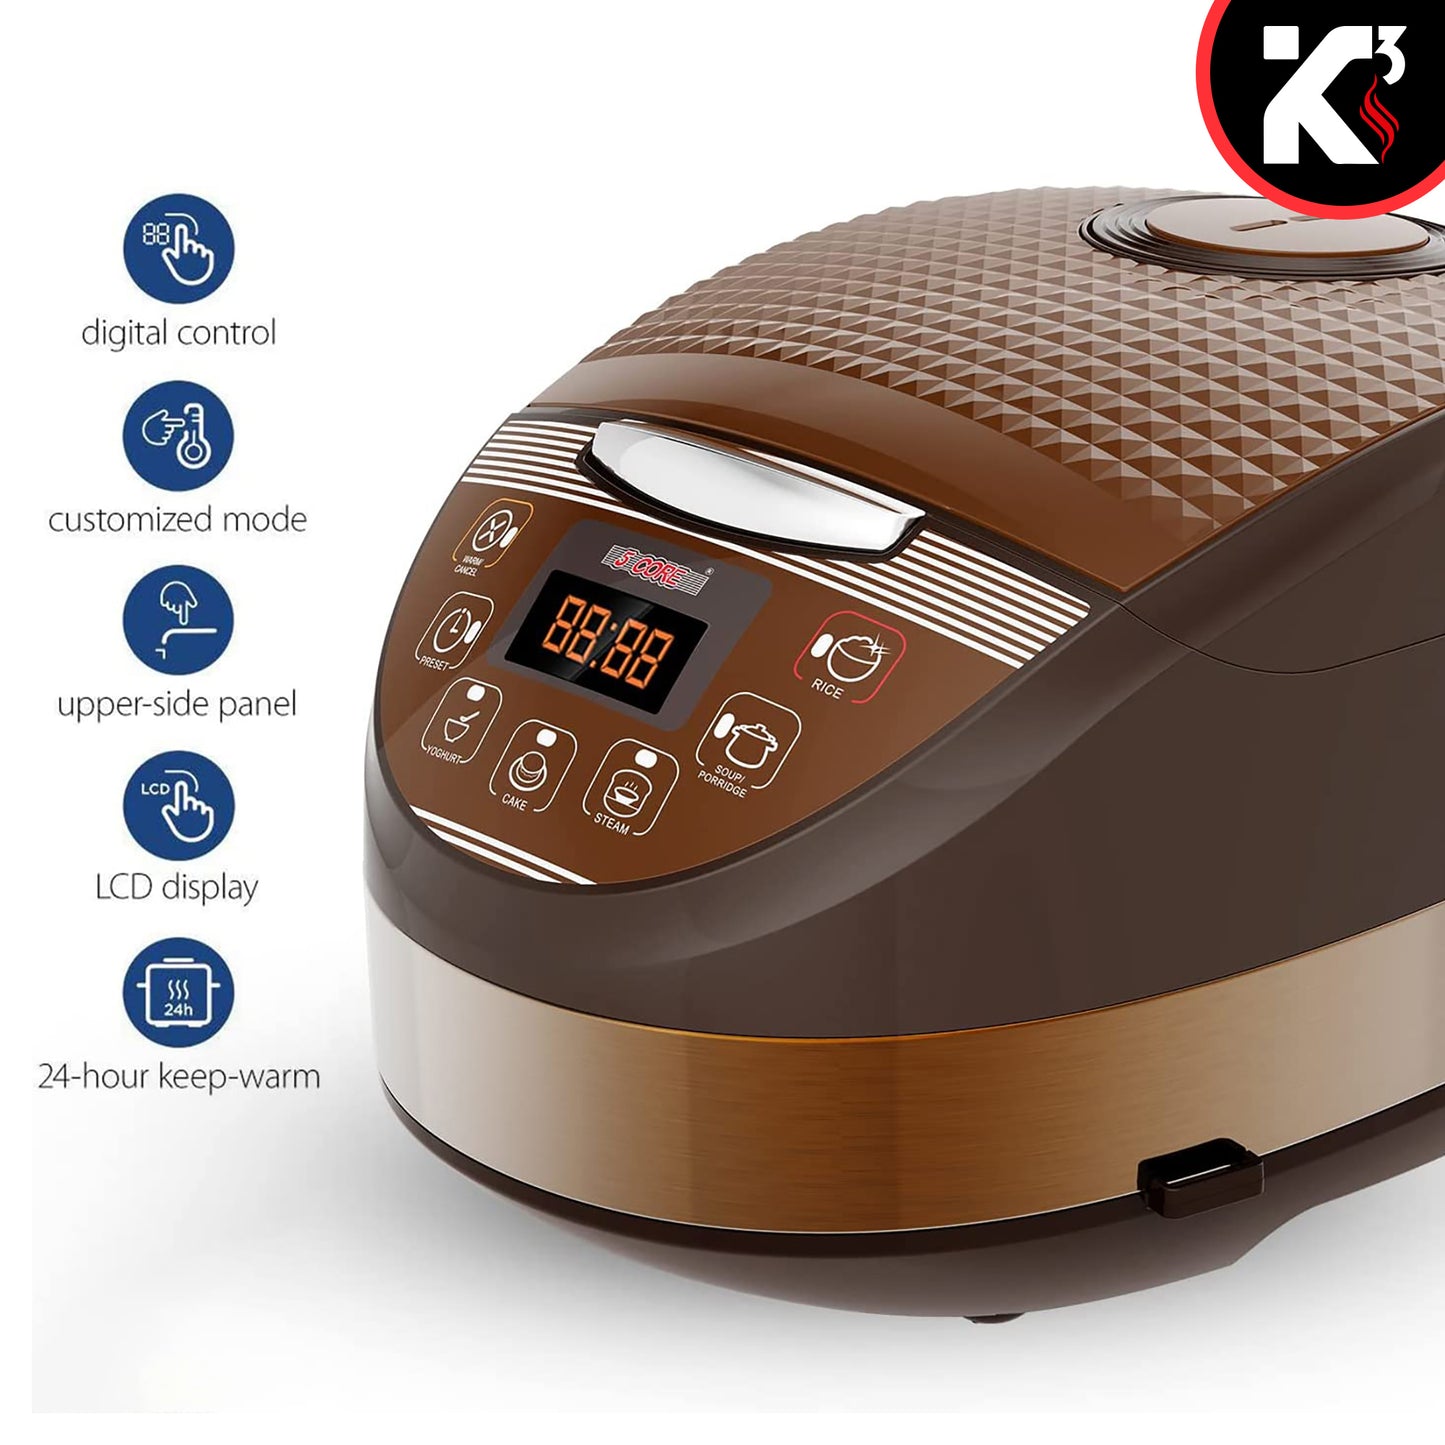 Kcubeinc 5.3Qt Asian Rice Cooker Digital Programmable 15-in-1 Ergonomic Large Touch Screen Electric Multi Cooker Slow Cooker Steamer Pot Warmer 11 Cups 24 Hour Delay Timer Auto Keep Warm Feature RC 0502